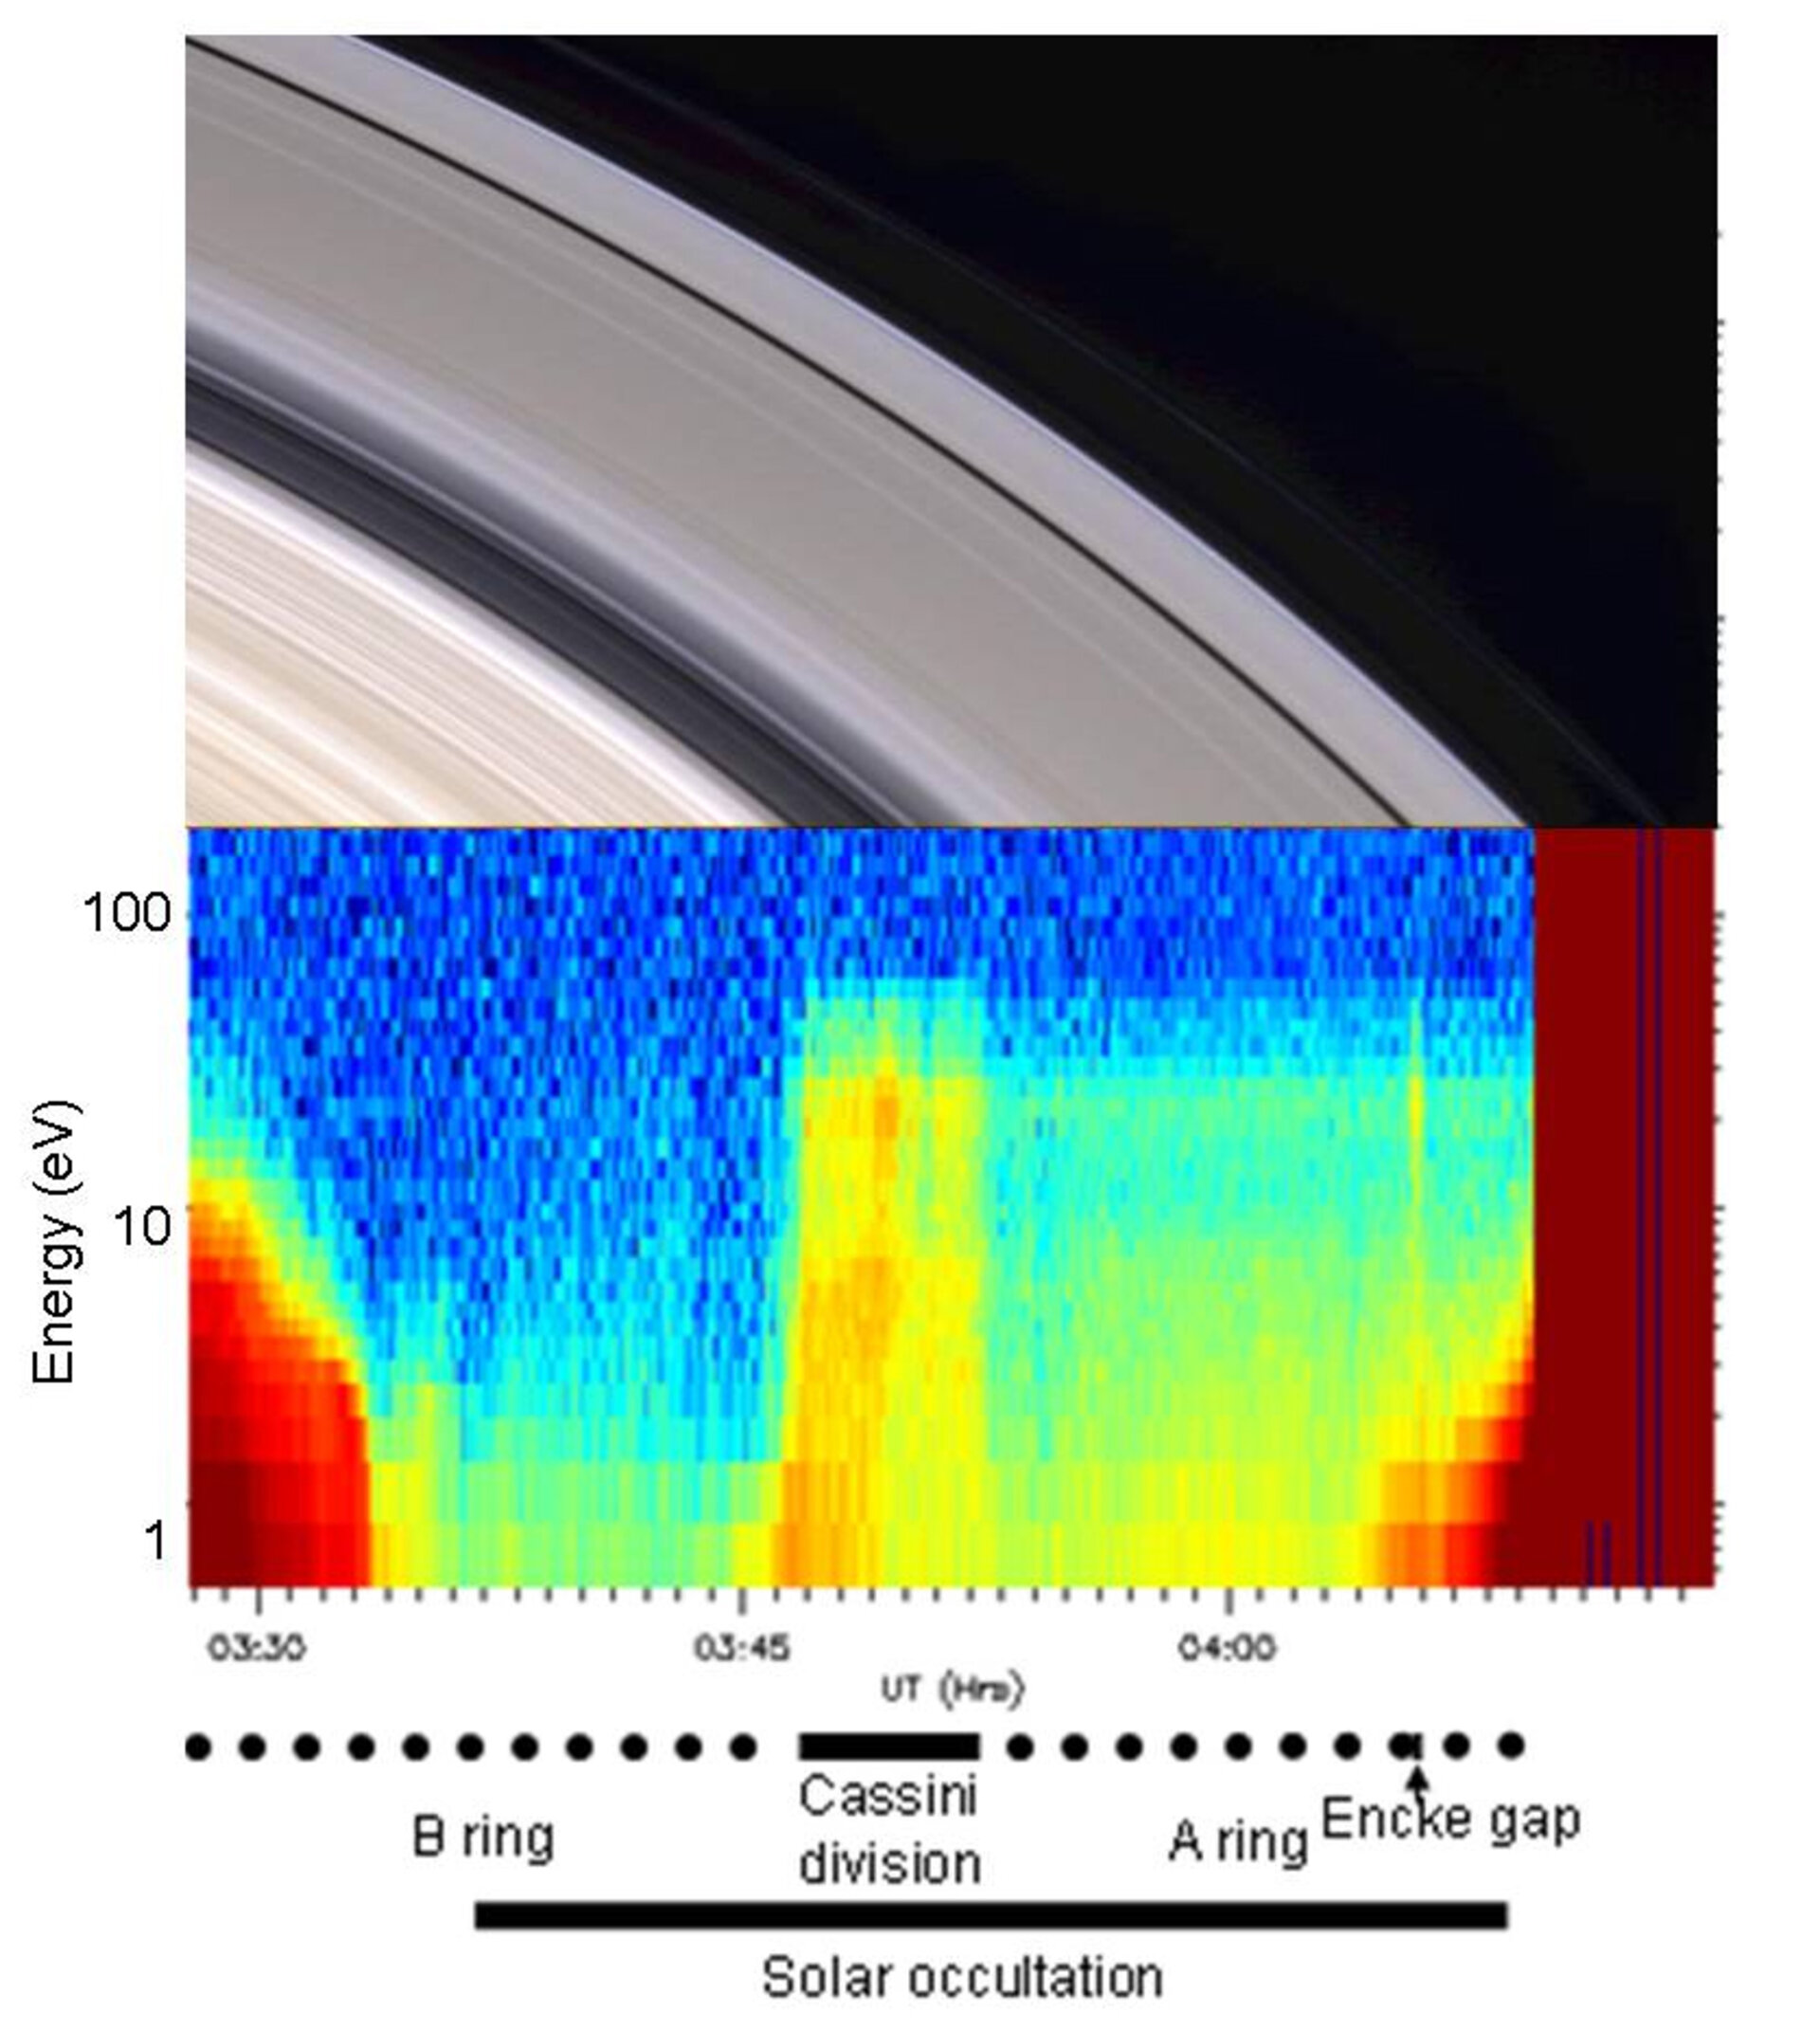 Spectrum from Cassini intruments indicating atmosphere over rings